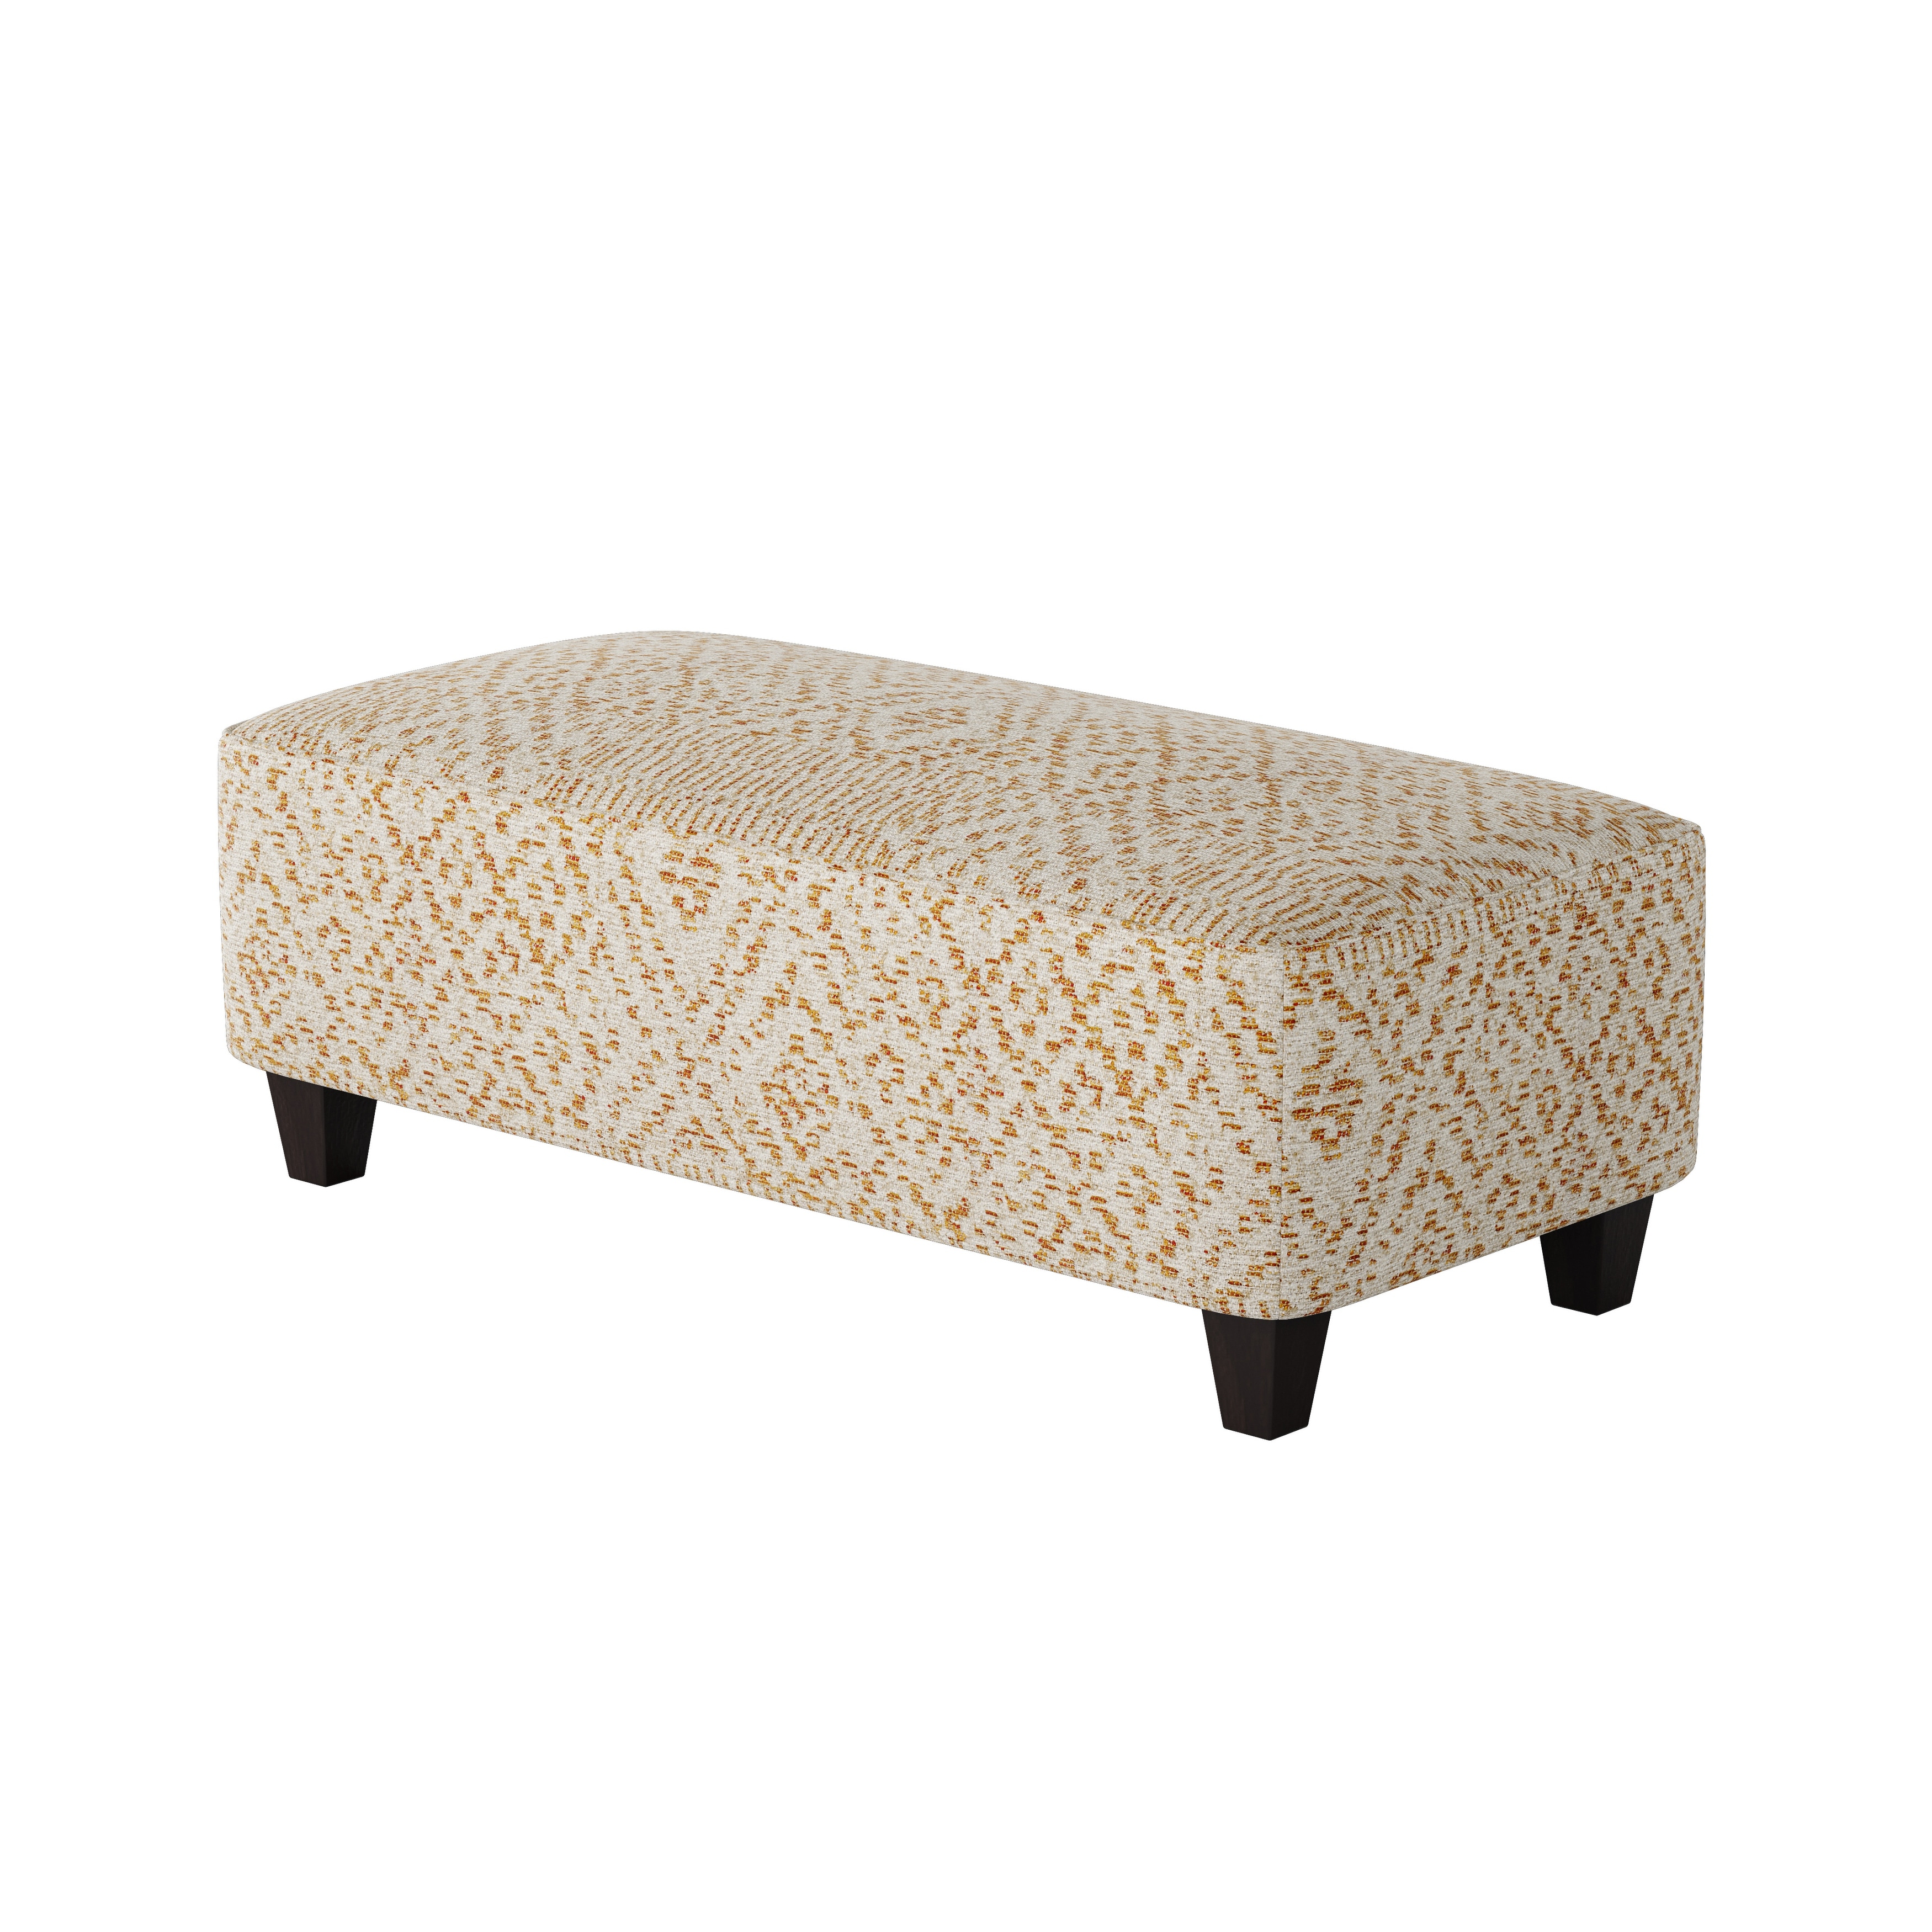 Southern Home Furnishings Roughwin Squash 49 inch Wide Cocktail Ottoman